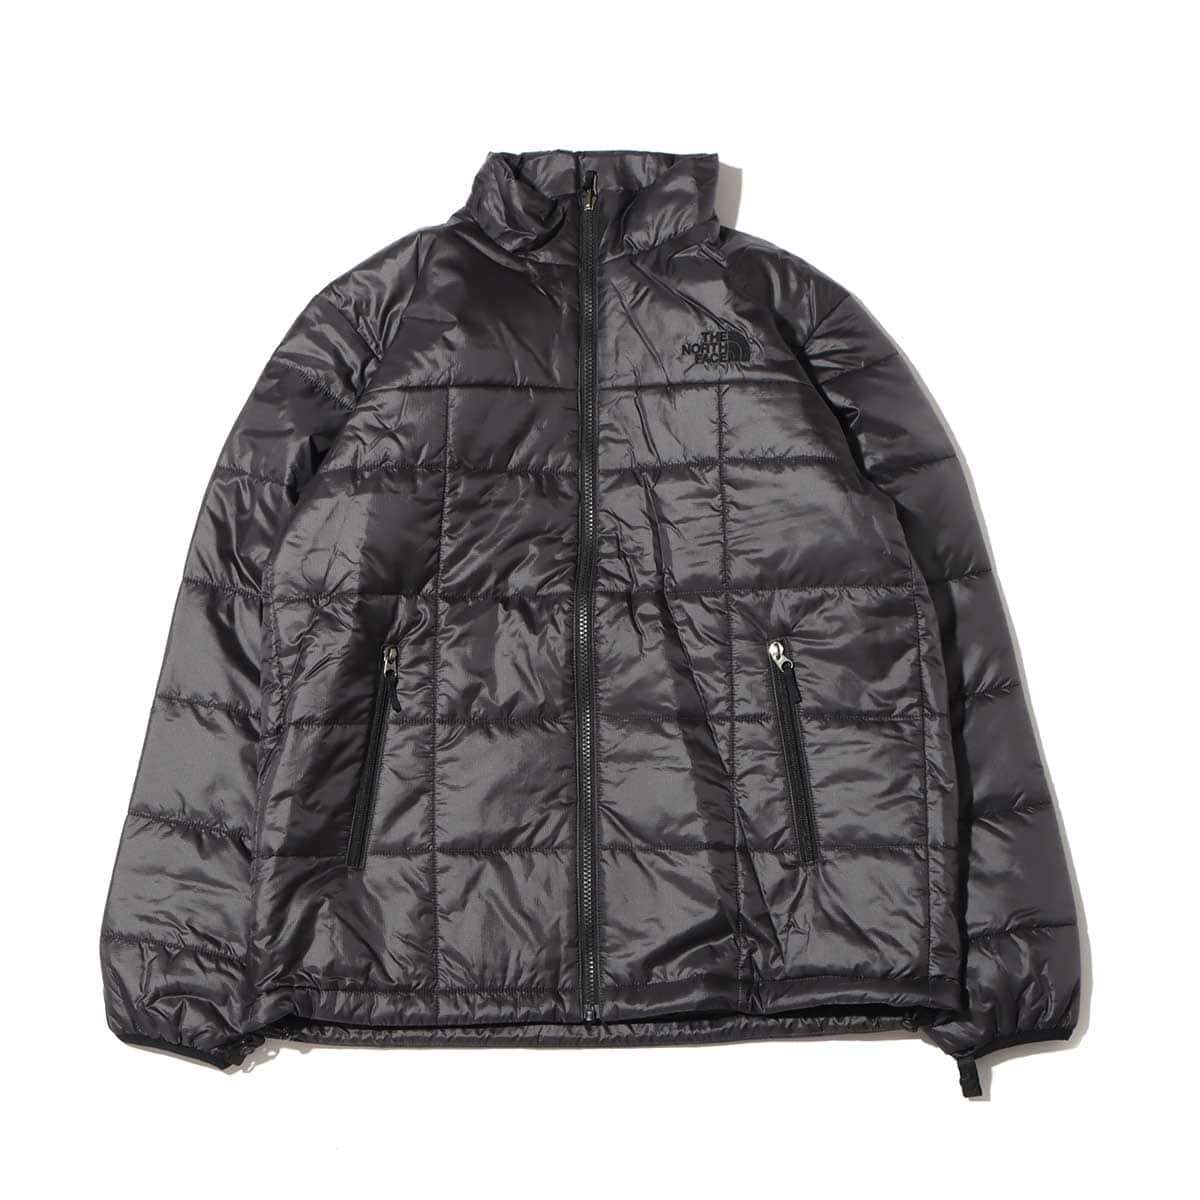 THE NORTH FACE CASSIUS TRICLIMATE JACKET ニュートープ 21FW-I